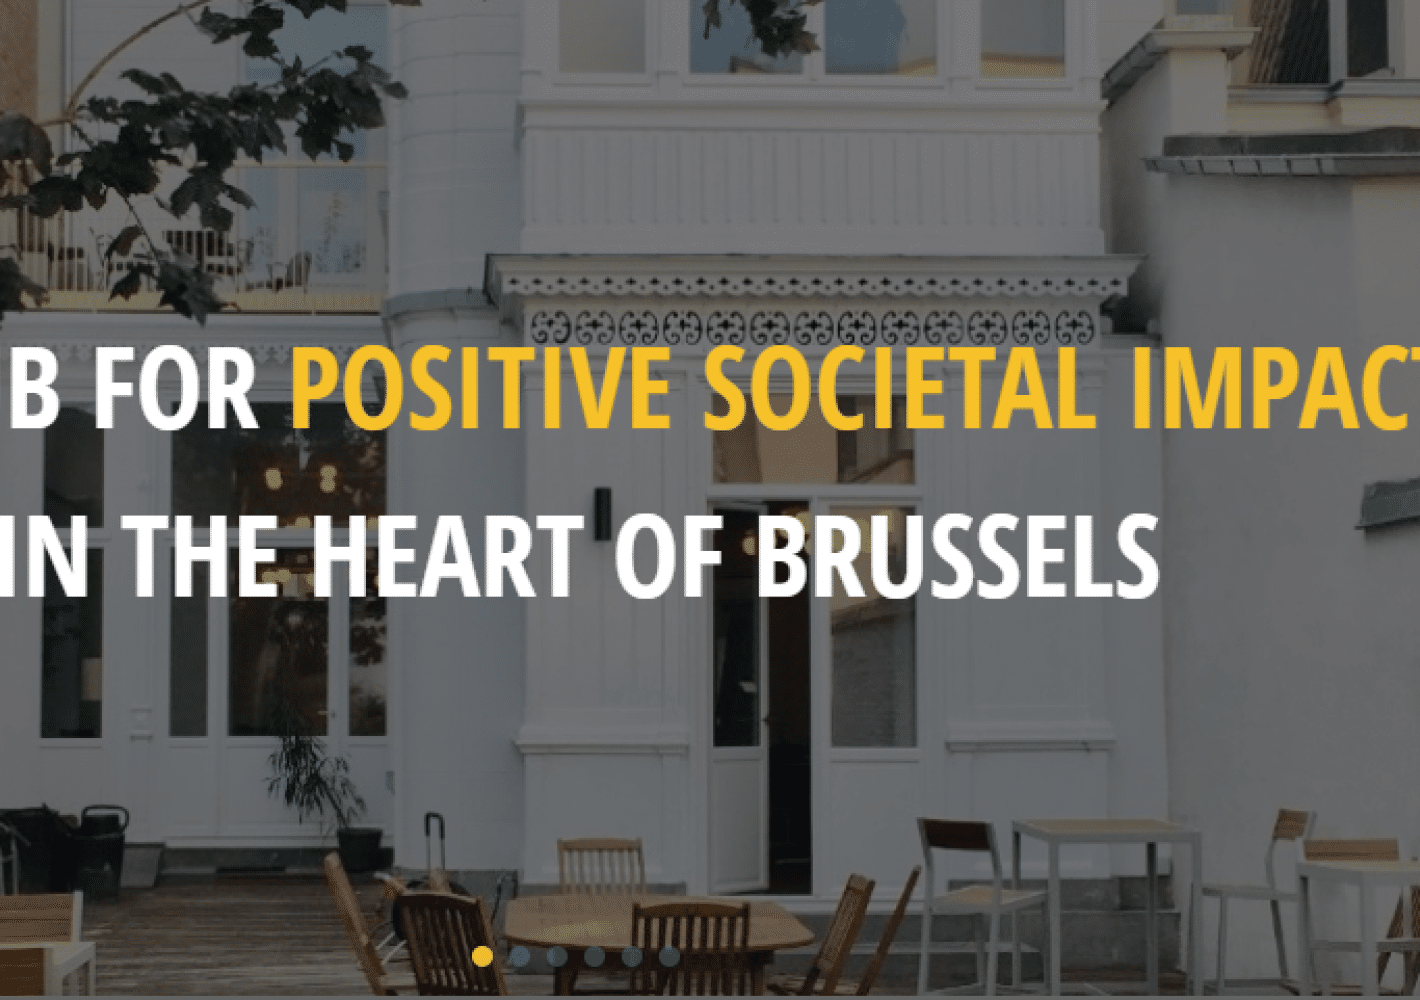 Written line: "The hub for the positive social impact in the hear of Brussels". Background showcasing the garden of the Impact House.